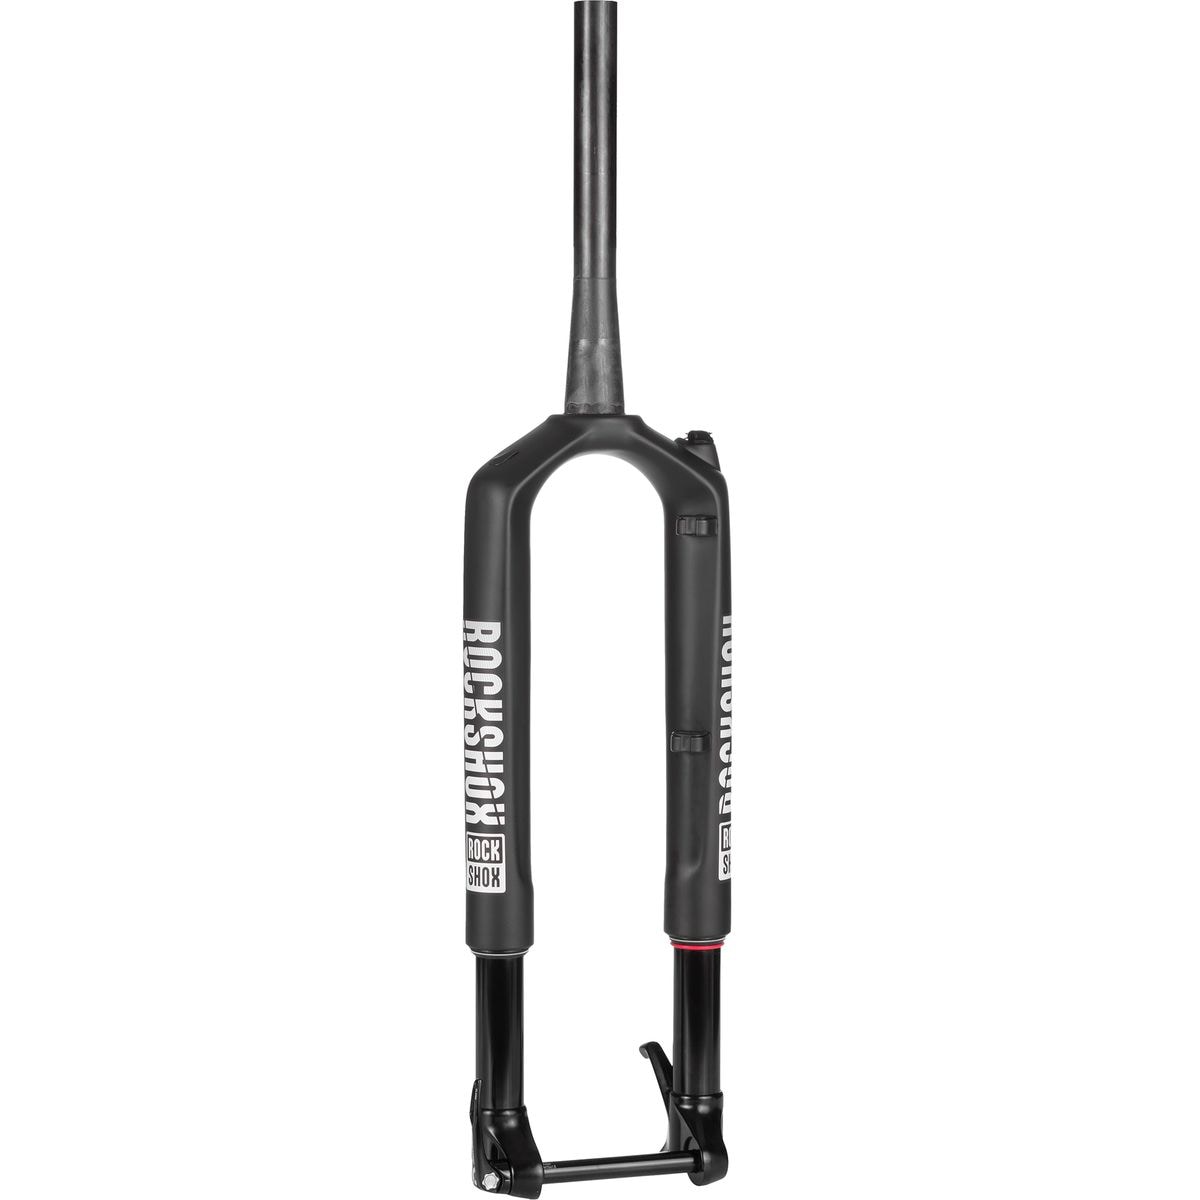 RockShox RS-1 RL Solo Air 100 Fork w/ Remote - 27.5in - 2018